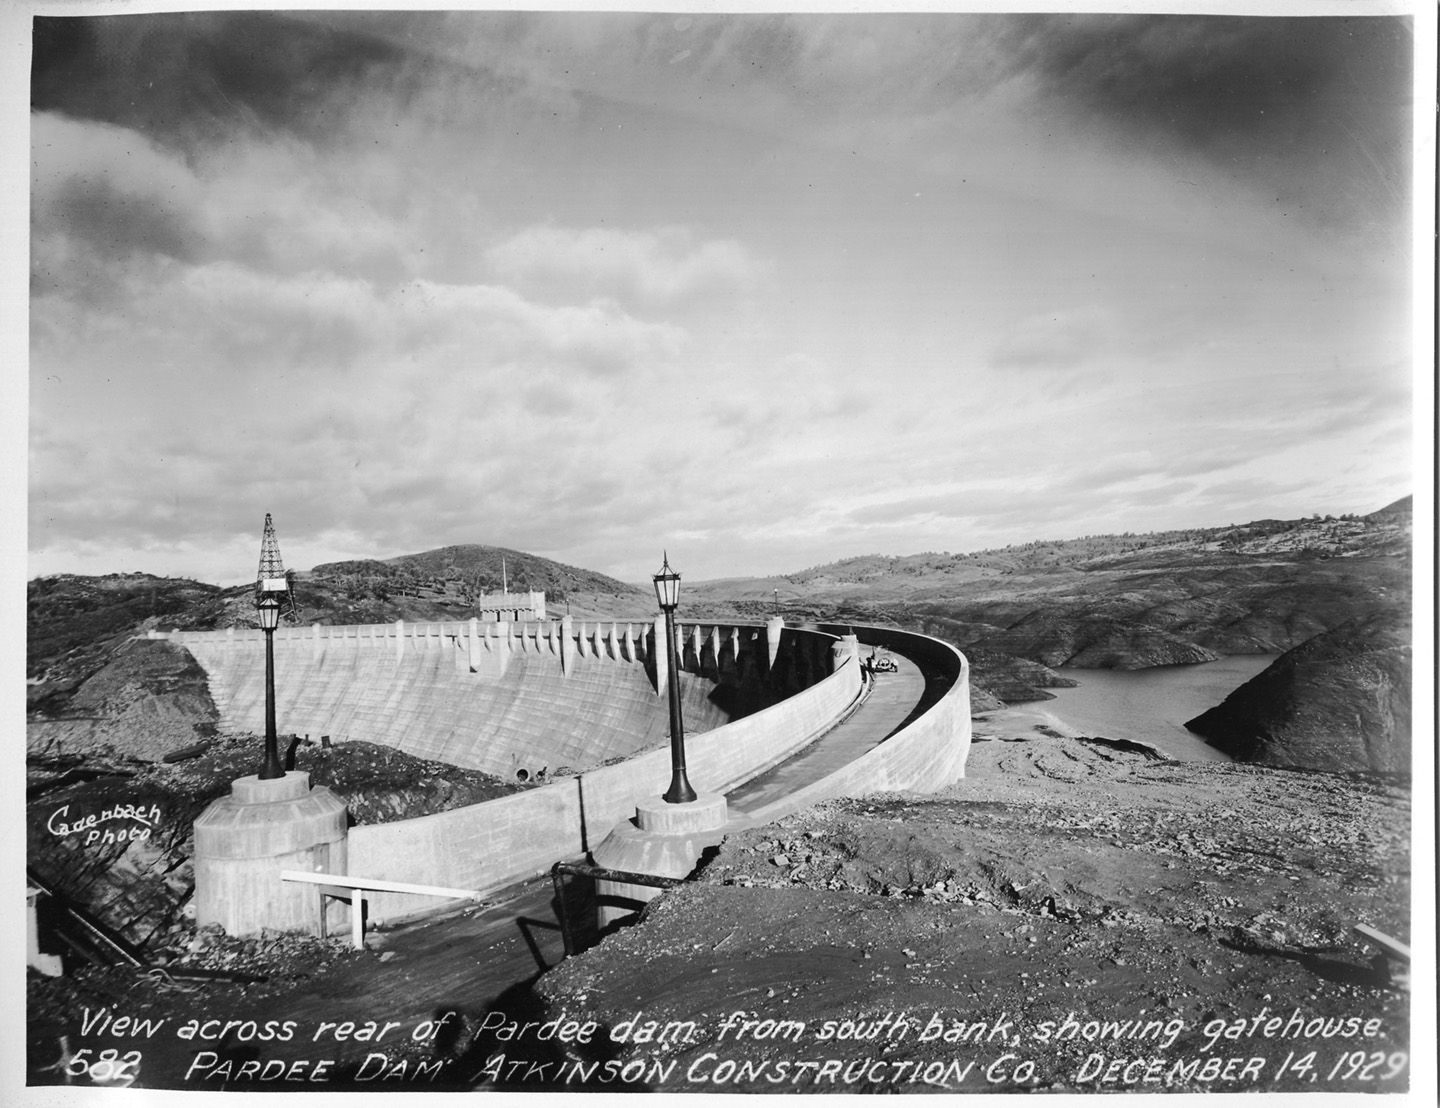 View across rear of Pardee Dam from south bank showing gatehouse. (December 1929)